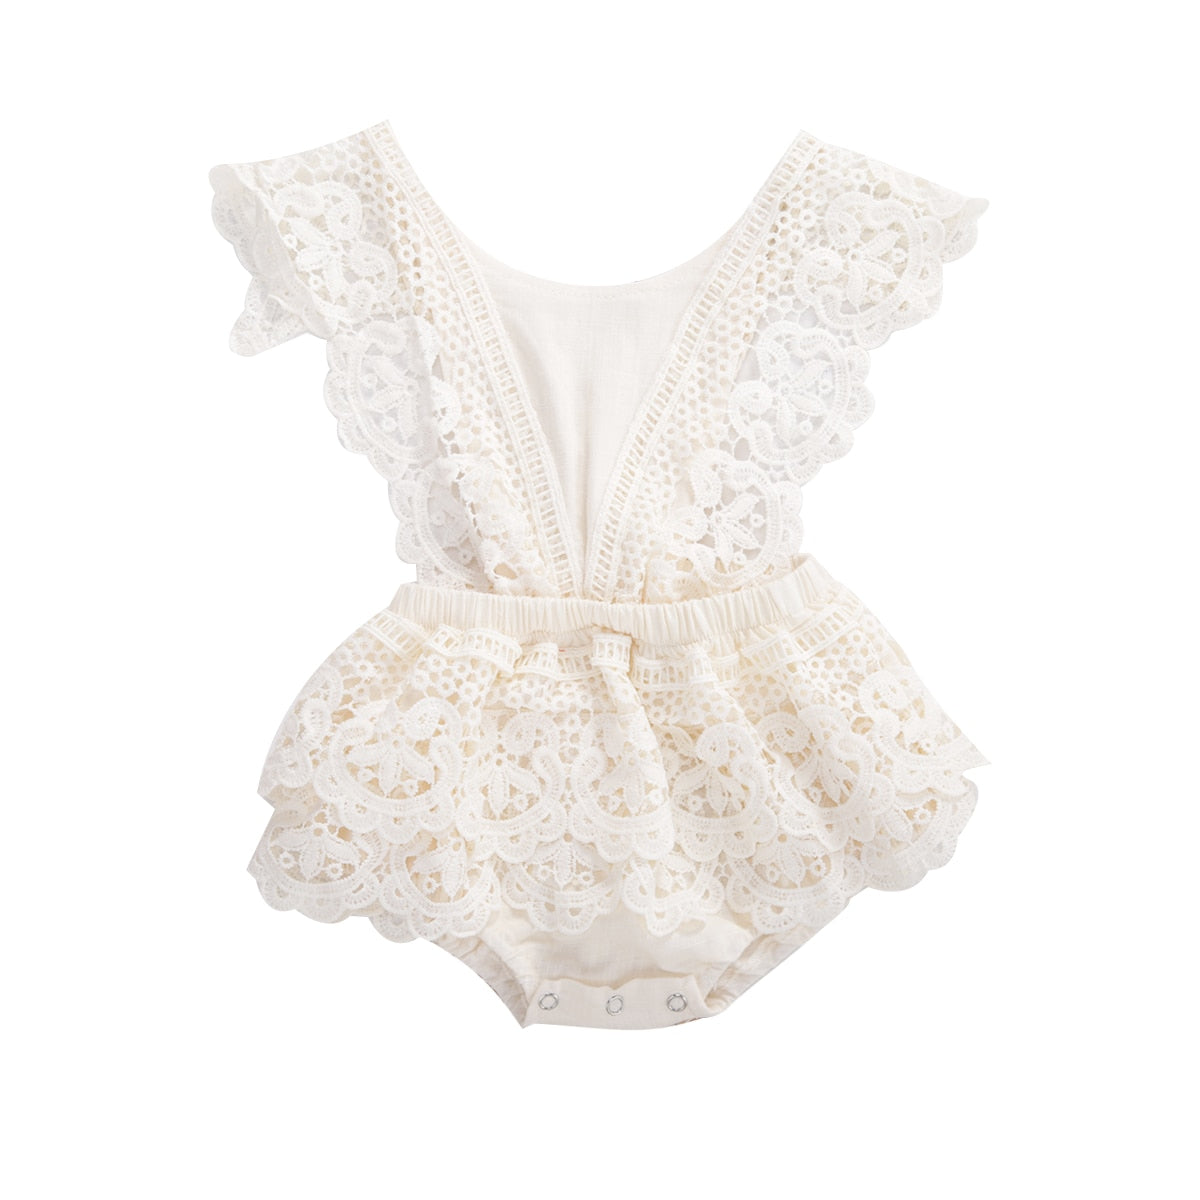 Baby Girl Lace Romper Dress